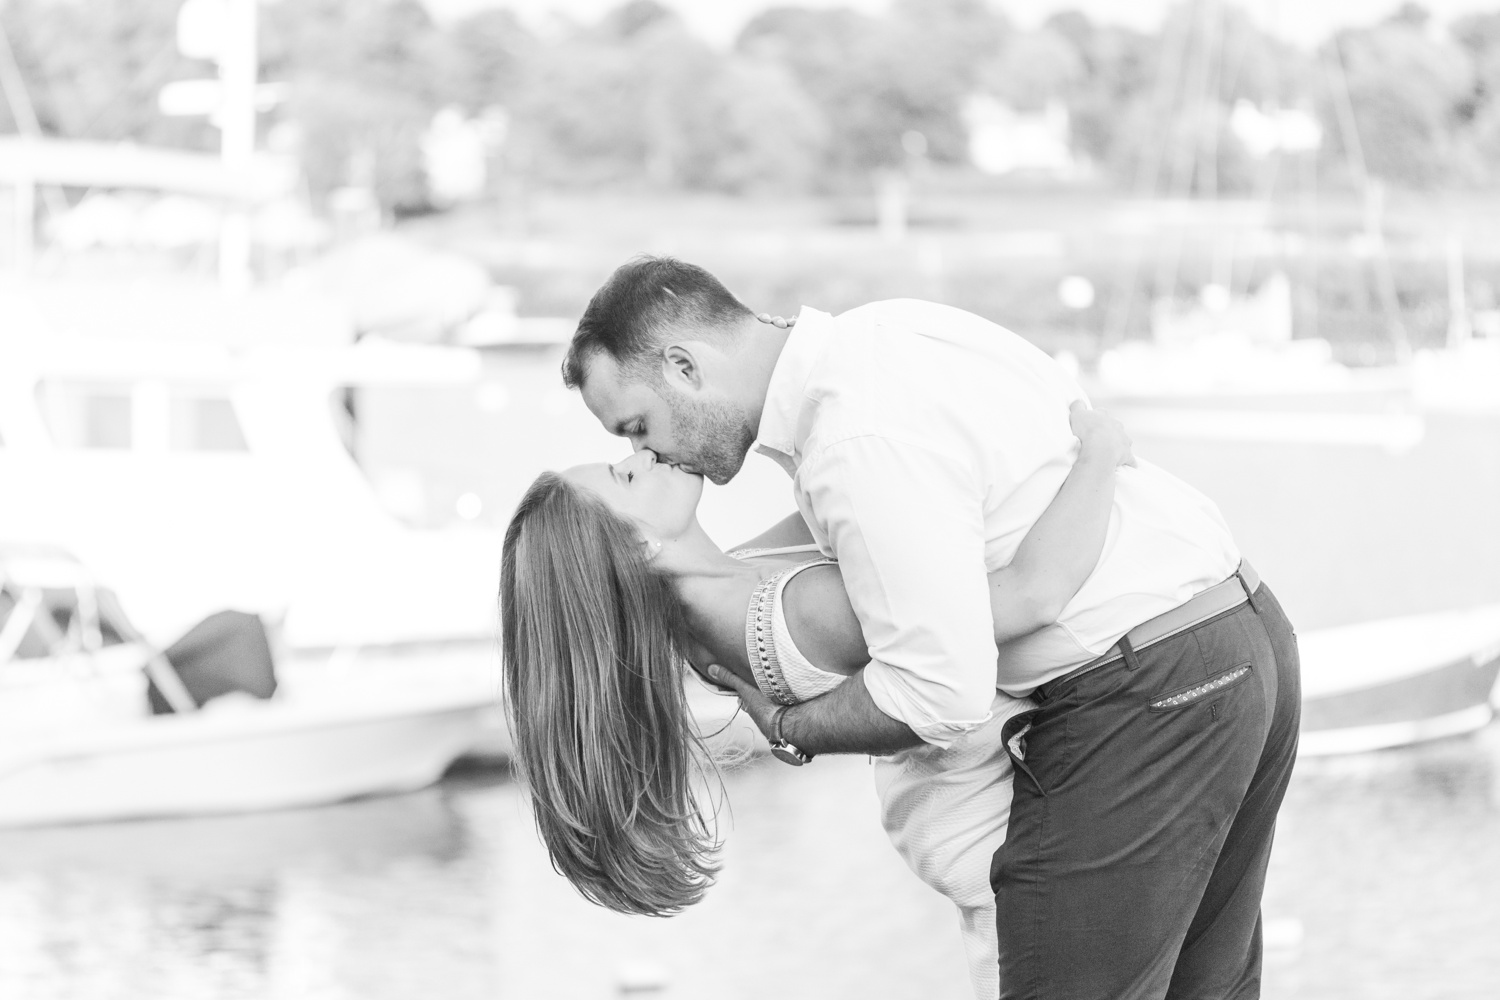 southport-beach-engagement-session-fairfield-ct-top-connecticut-nyc-destination-wedding-photographer-shaina-lee-photography-photo